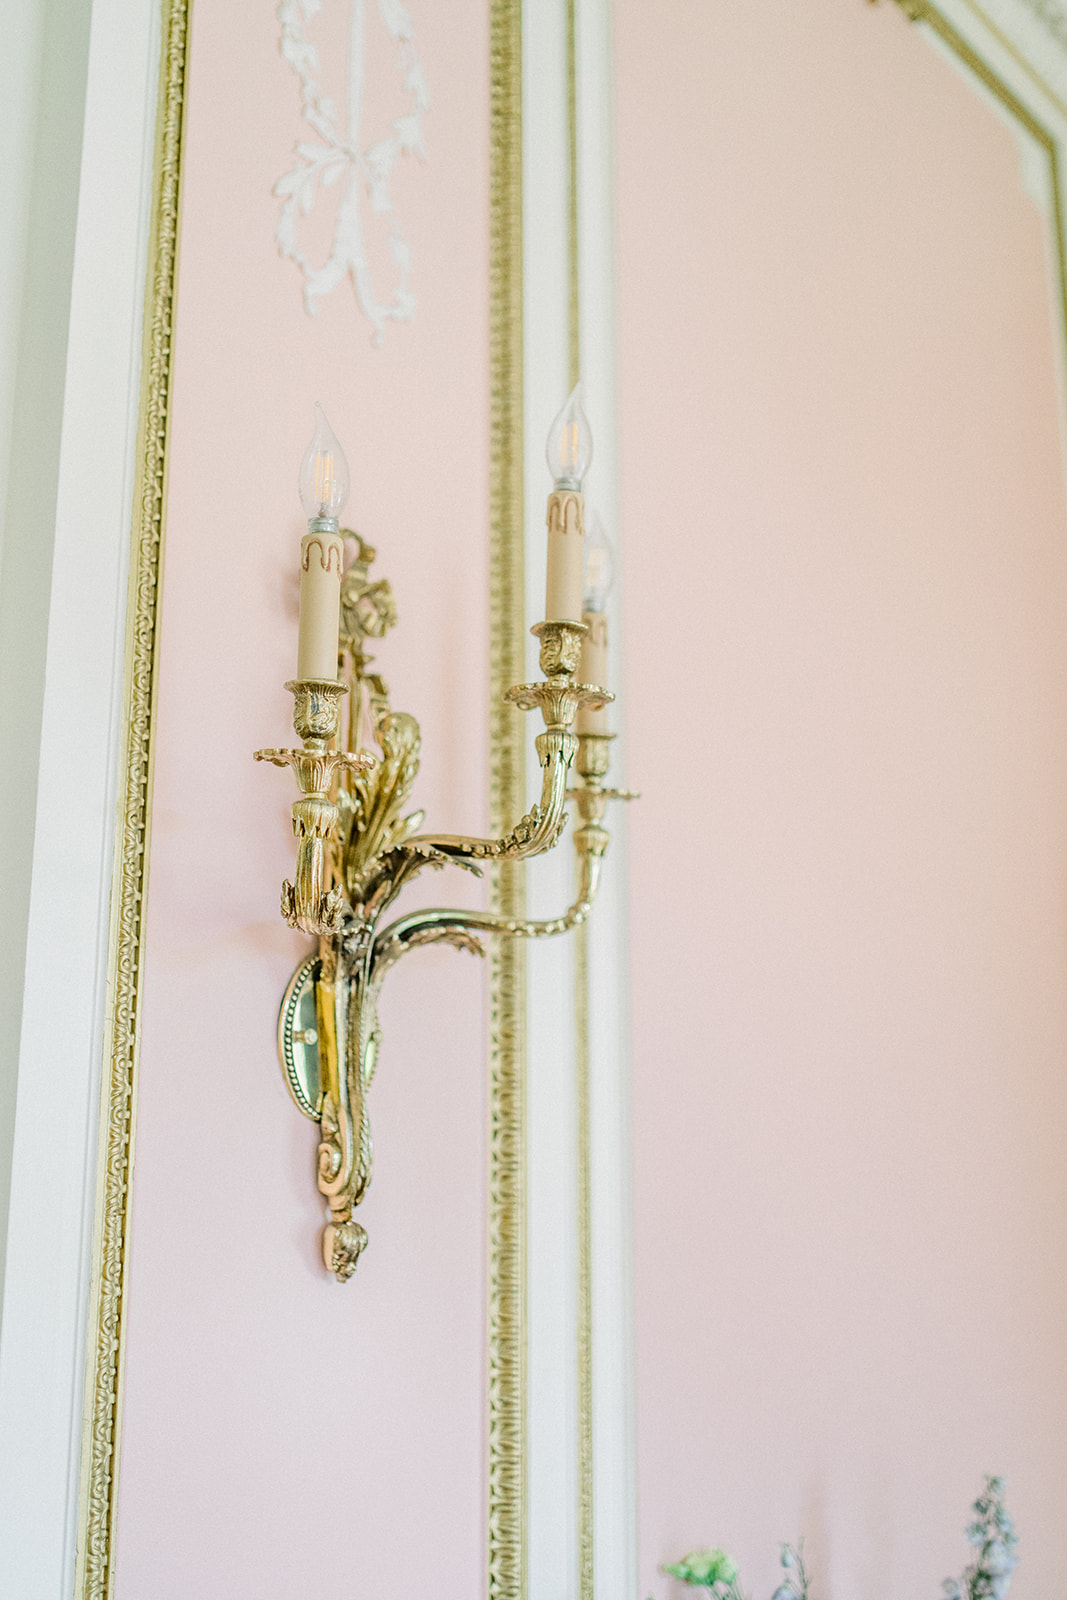 Gold brass antique candle lite on a pink wall at a destination wedding at Cairnwood Estate